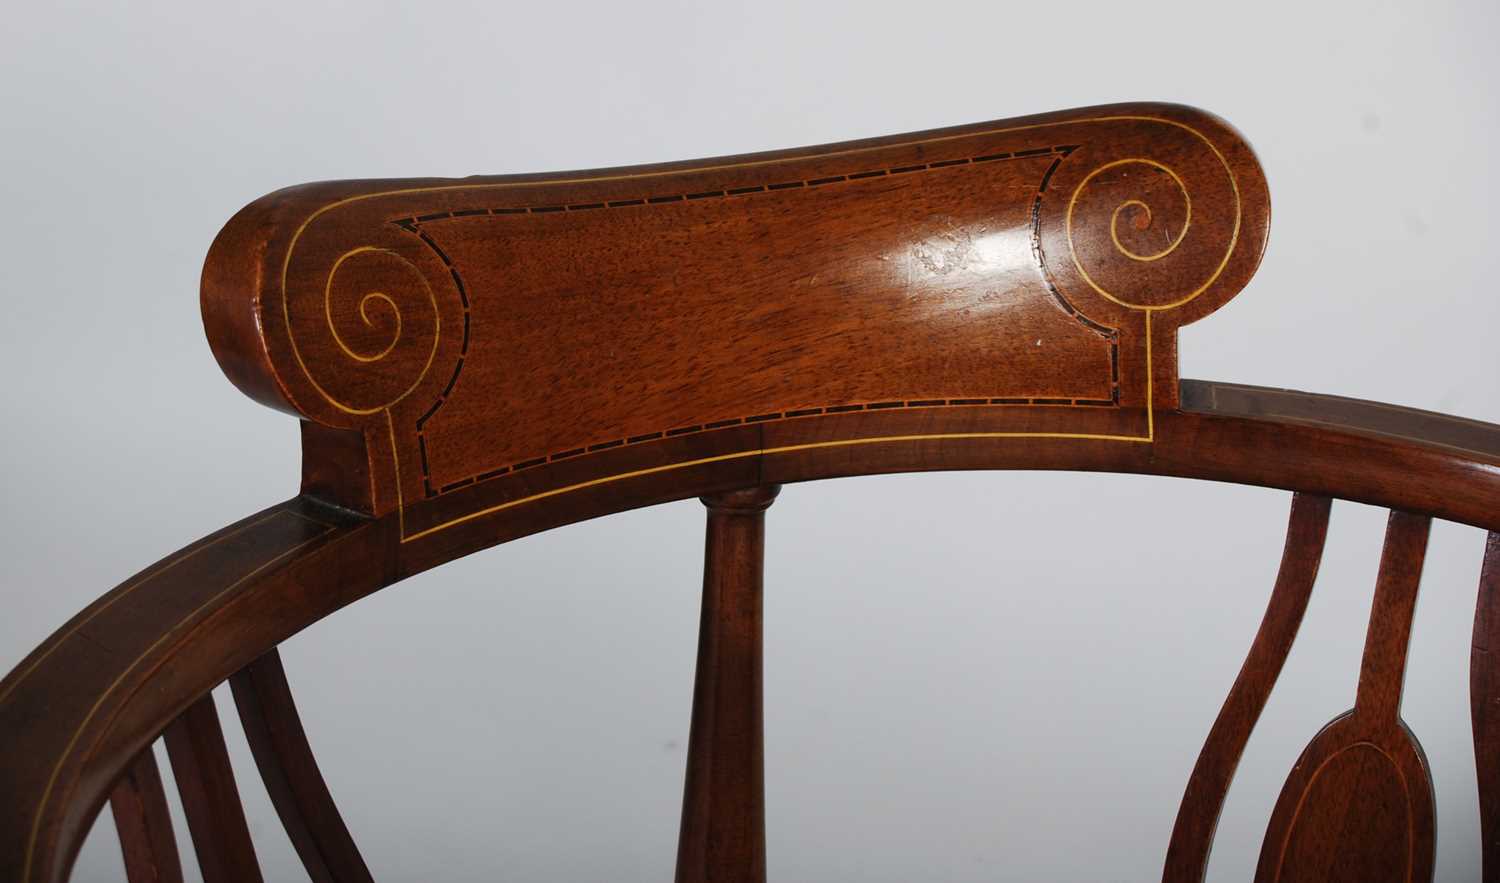 Two Edwardian mahogany chairs, one a horseshoe back armchair with vertical spindle gallery, floral - Image 2 of 9